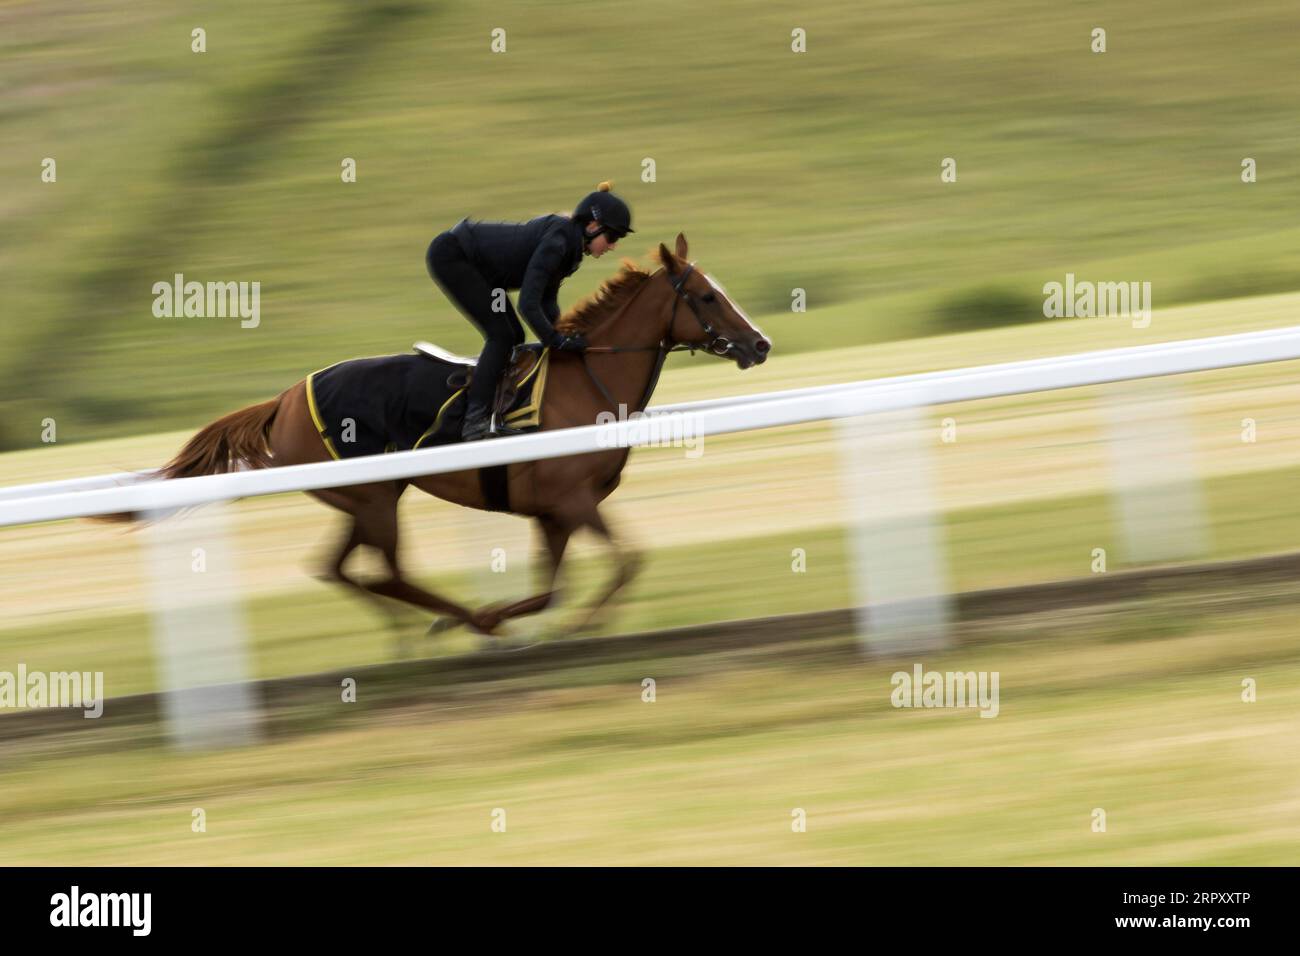 200605 -- KINGSCLERE, June 5, 2020 Xinhua -- A rider trains on the gallops at the Kingsclere Park House Stables, which are run by horse racing trainer Andrew Balding, in Hampshire, Britain on June 5, 2020. Horse racing behind closed doors has resumed gradually in Britain after the government eased some lockdown restrictions. Racing is taking place behind closed doors with strict measures taken to prevent the spread of coronavirus. Photo by Tim Ireland/Xinhua SPBRITAIN-KINGSCLERE-COVID-19-HORSE RACING-TRAINING PUBLICATIONxNOTxINxCHN Stock Photo